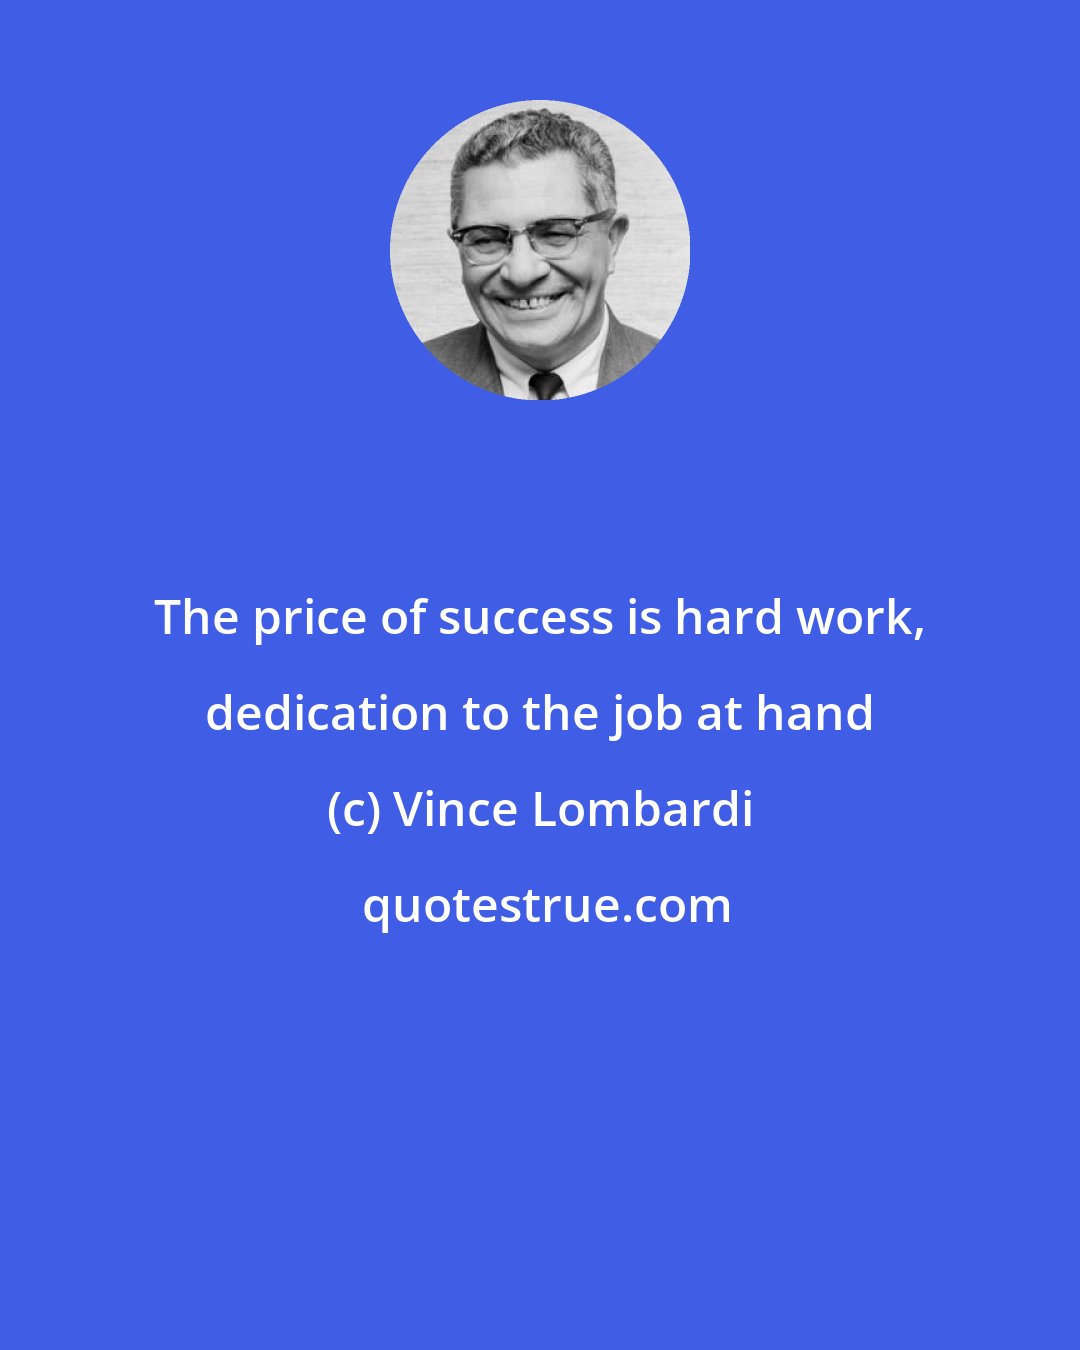 Vince Lombardi: The price of success is hard work, dedication to the job at hand